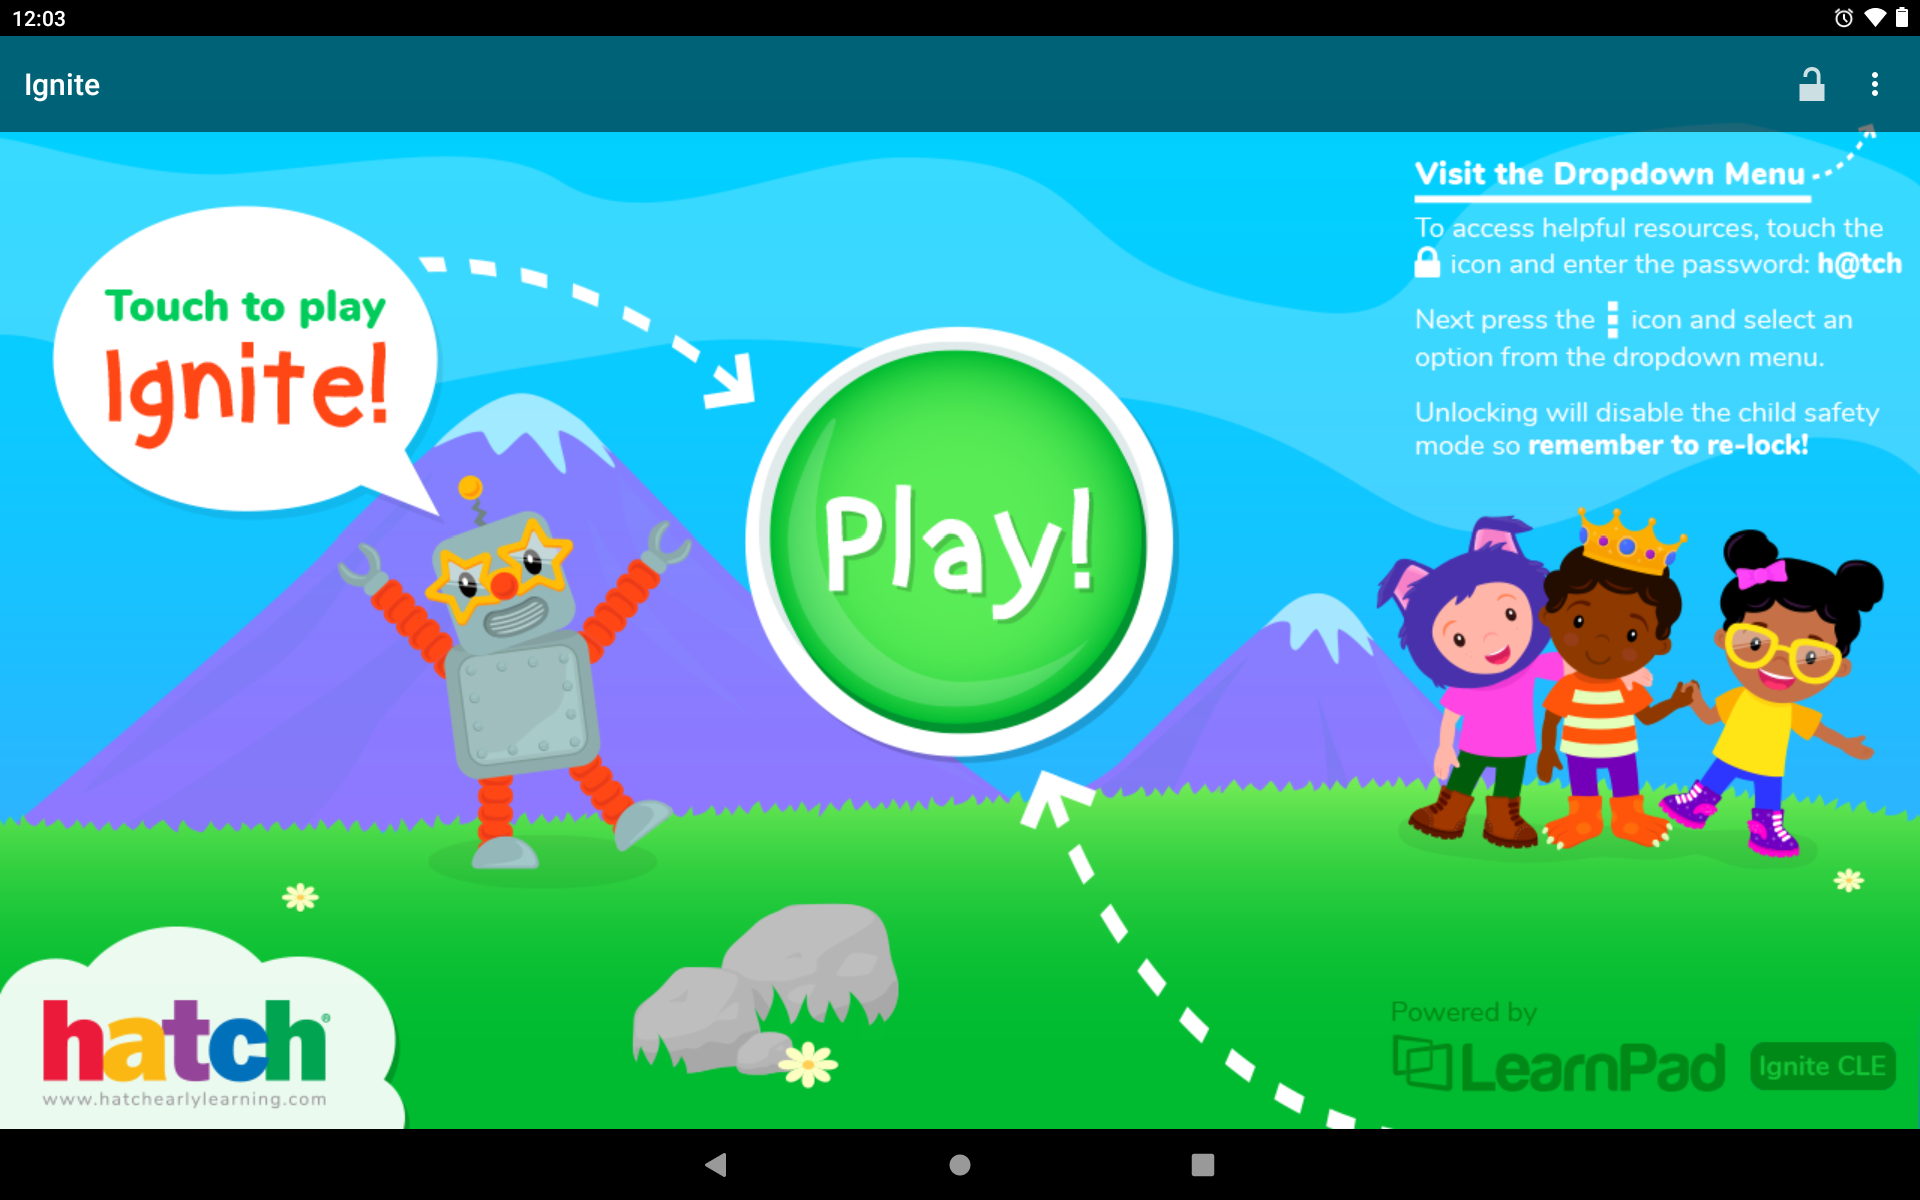 1-Android10-LearnPad-IgniteCLE-Home-Landing-Pad.png